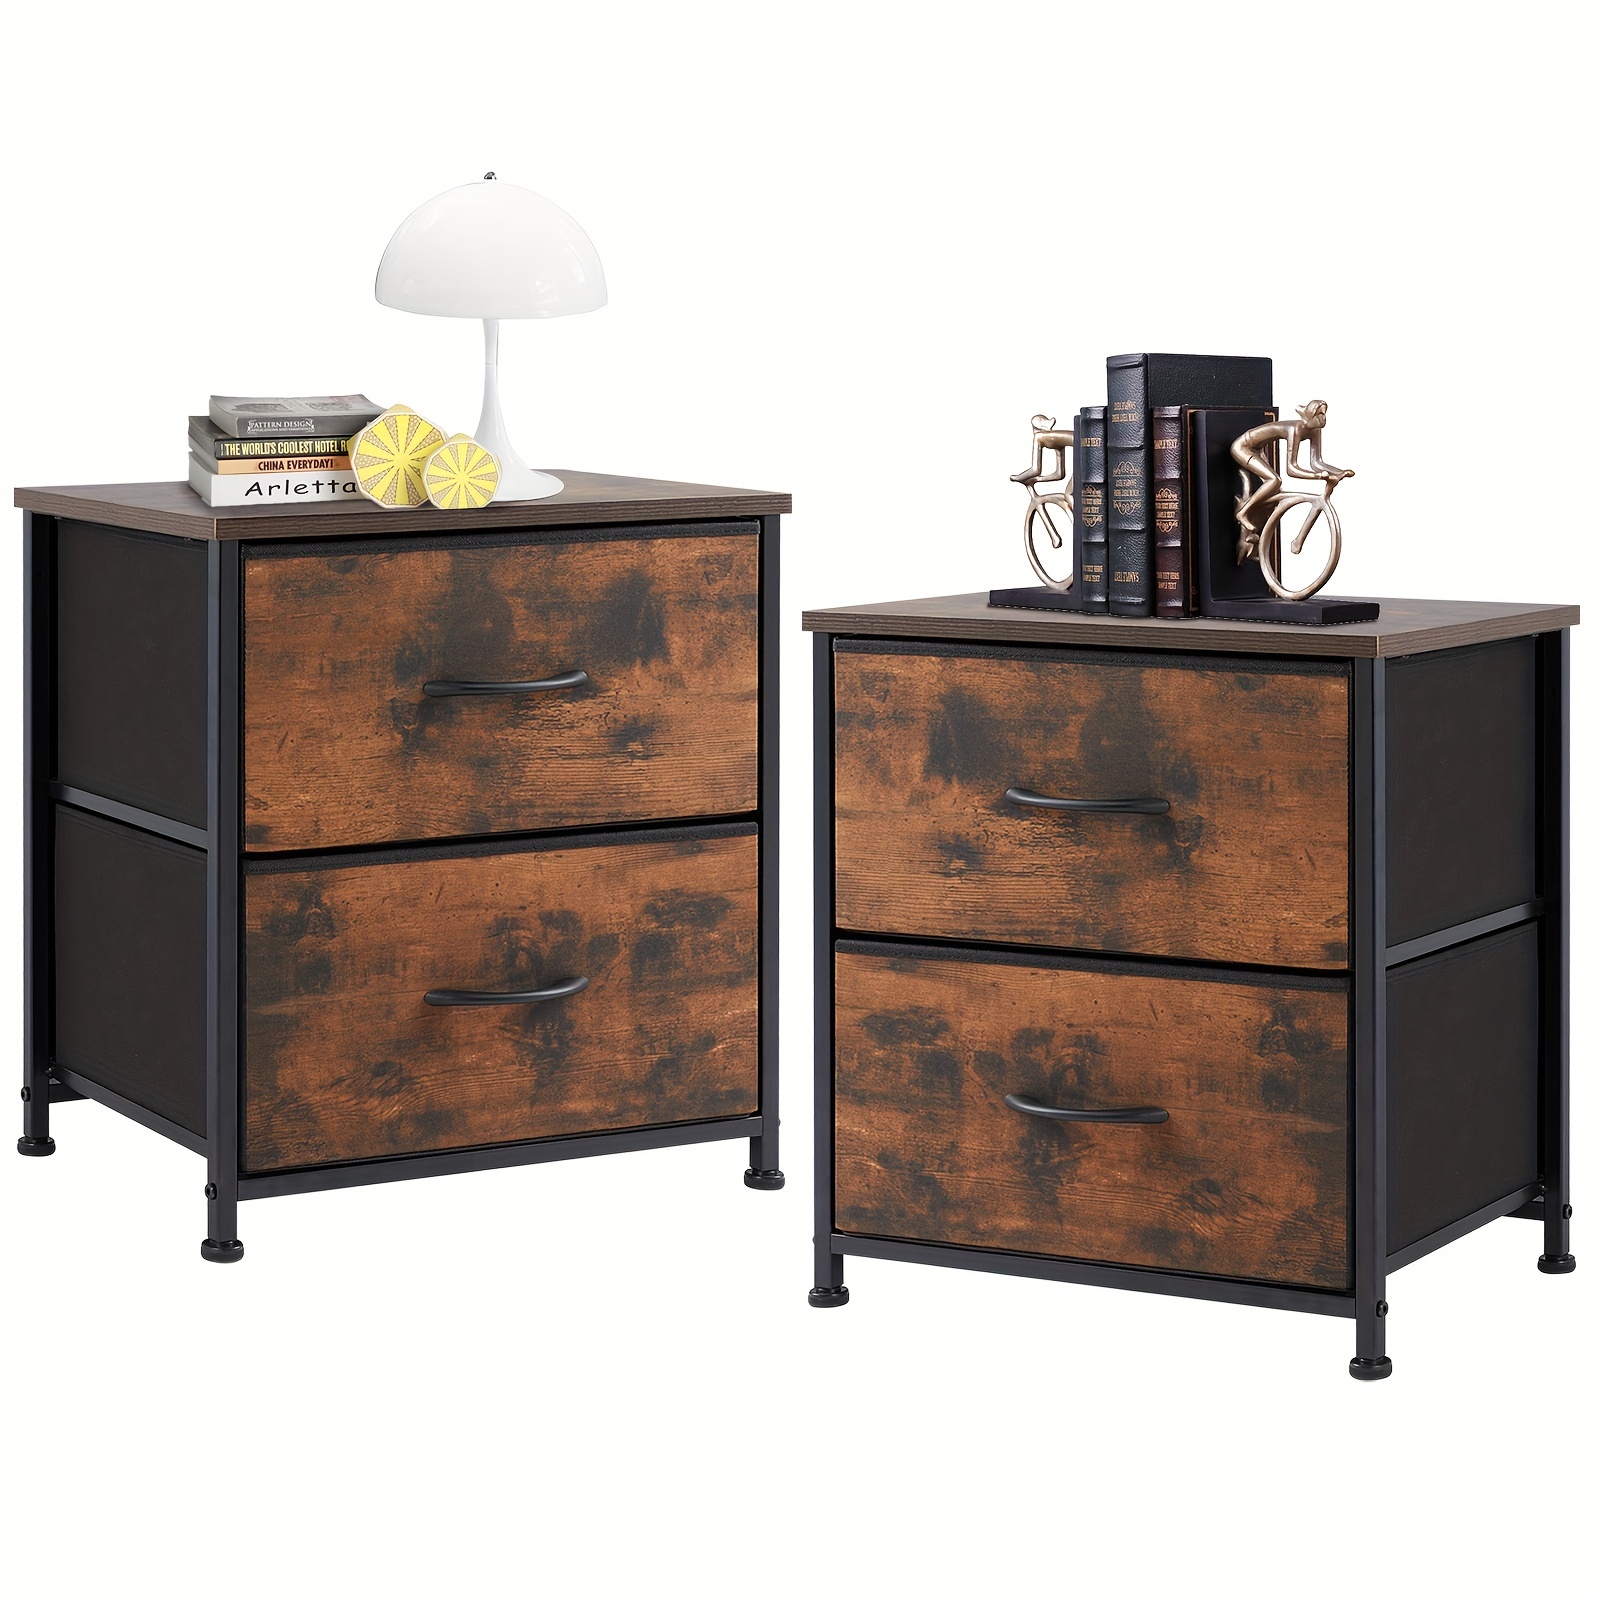 

2pcs/set Nightstands, 2 Drawer Dresser For Bedroom Night Stand Small Dresser End Table With Drawers